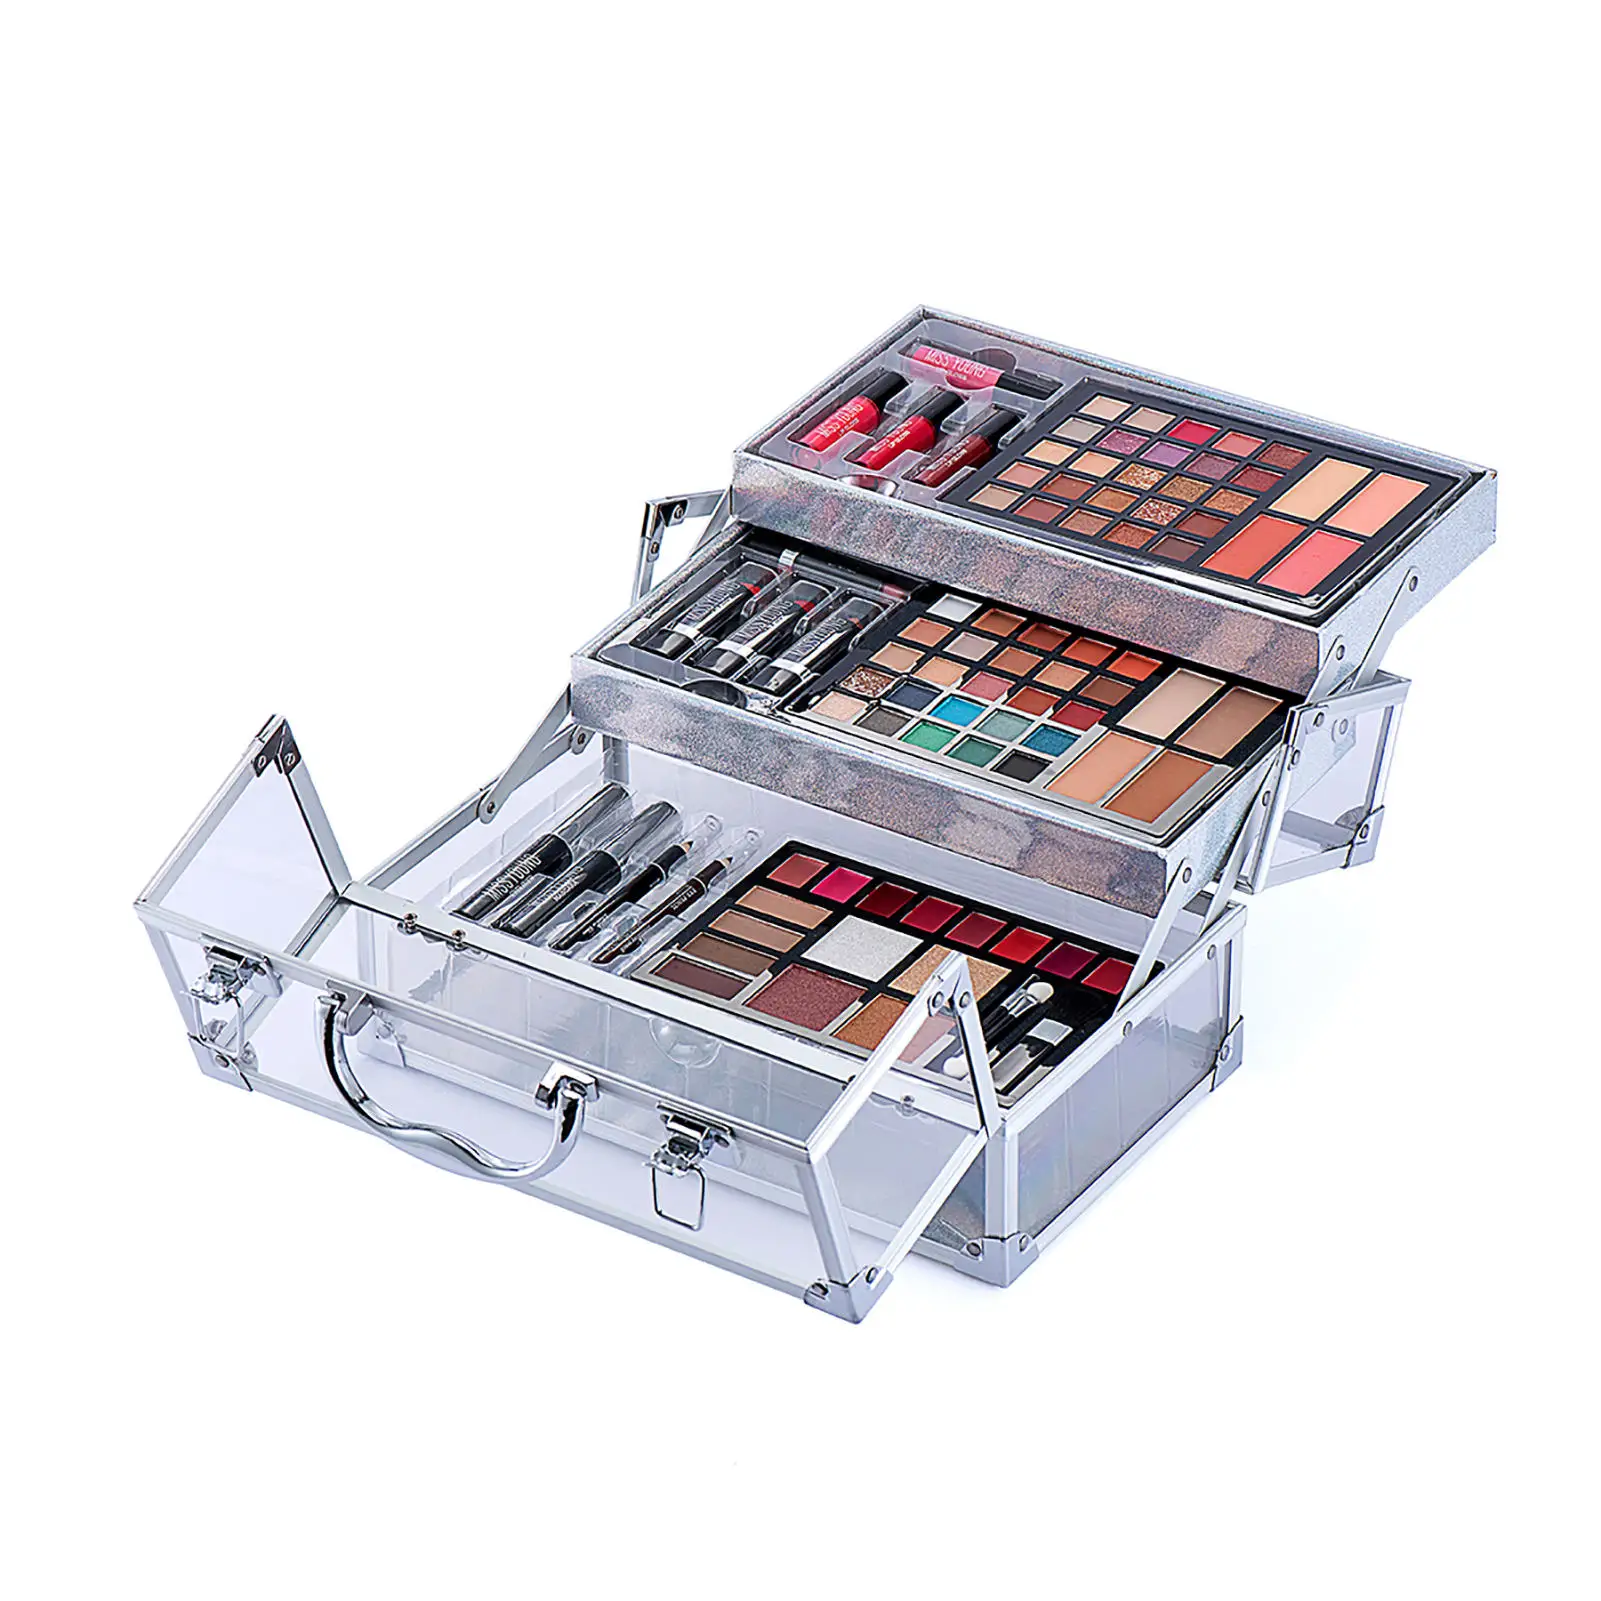 

Professional Makeup Set Cosmetic Make Up Starter Kit Portable Cosmetic Case Travel Make Up Palette With Aluminum Handle Birthday